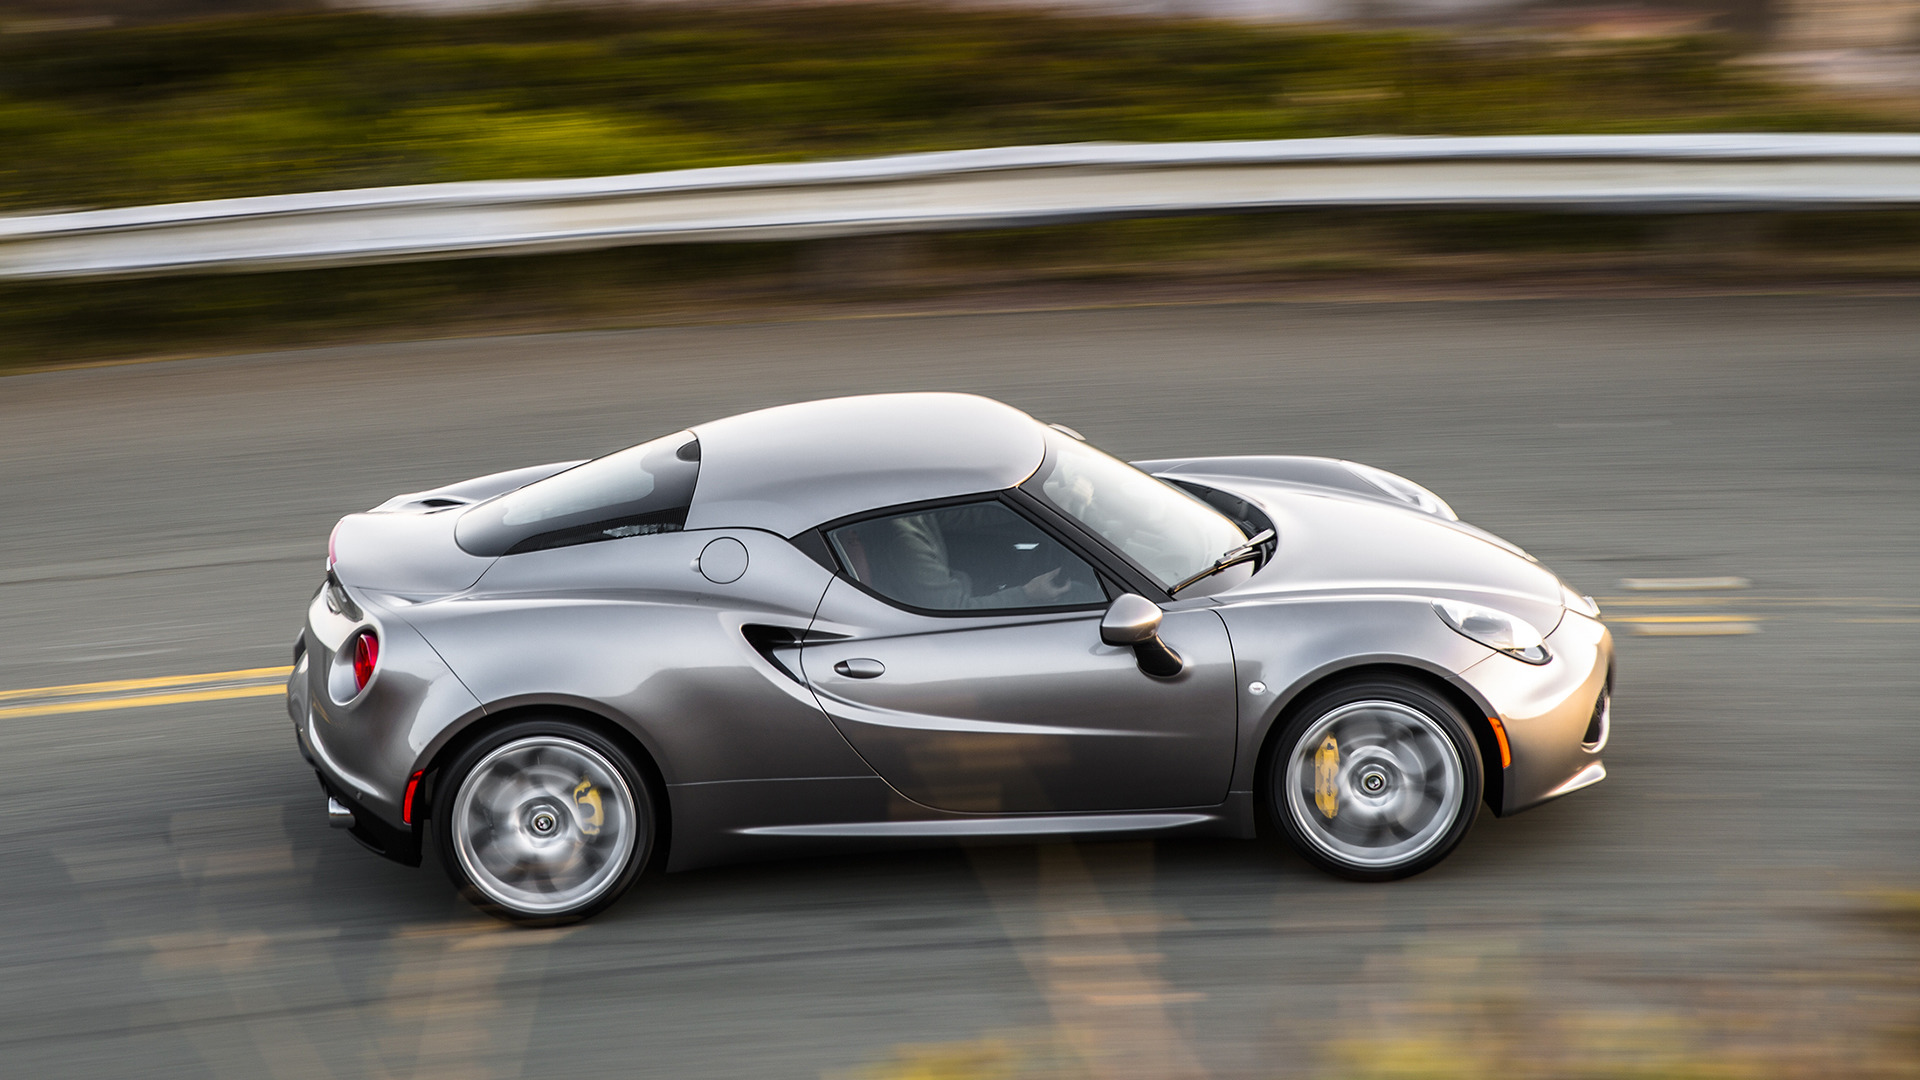 Alfa Romeo 4C Coupe Gets The Axe, But The Spider Lives On